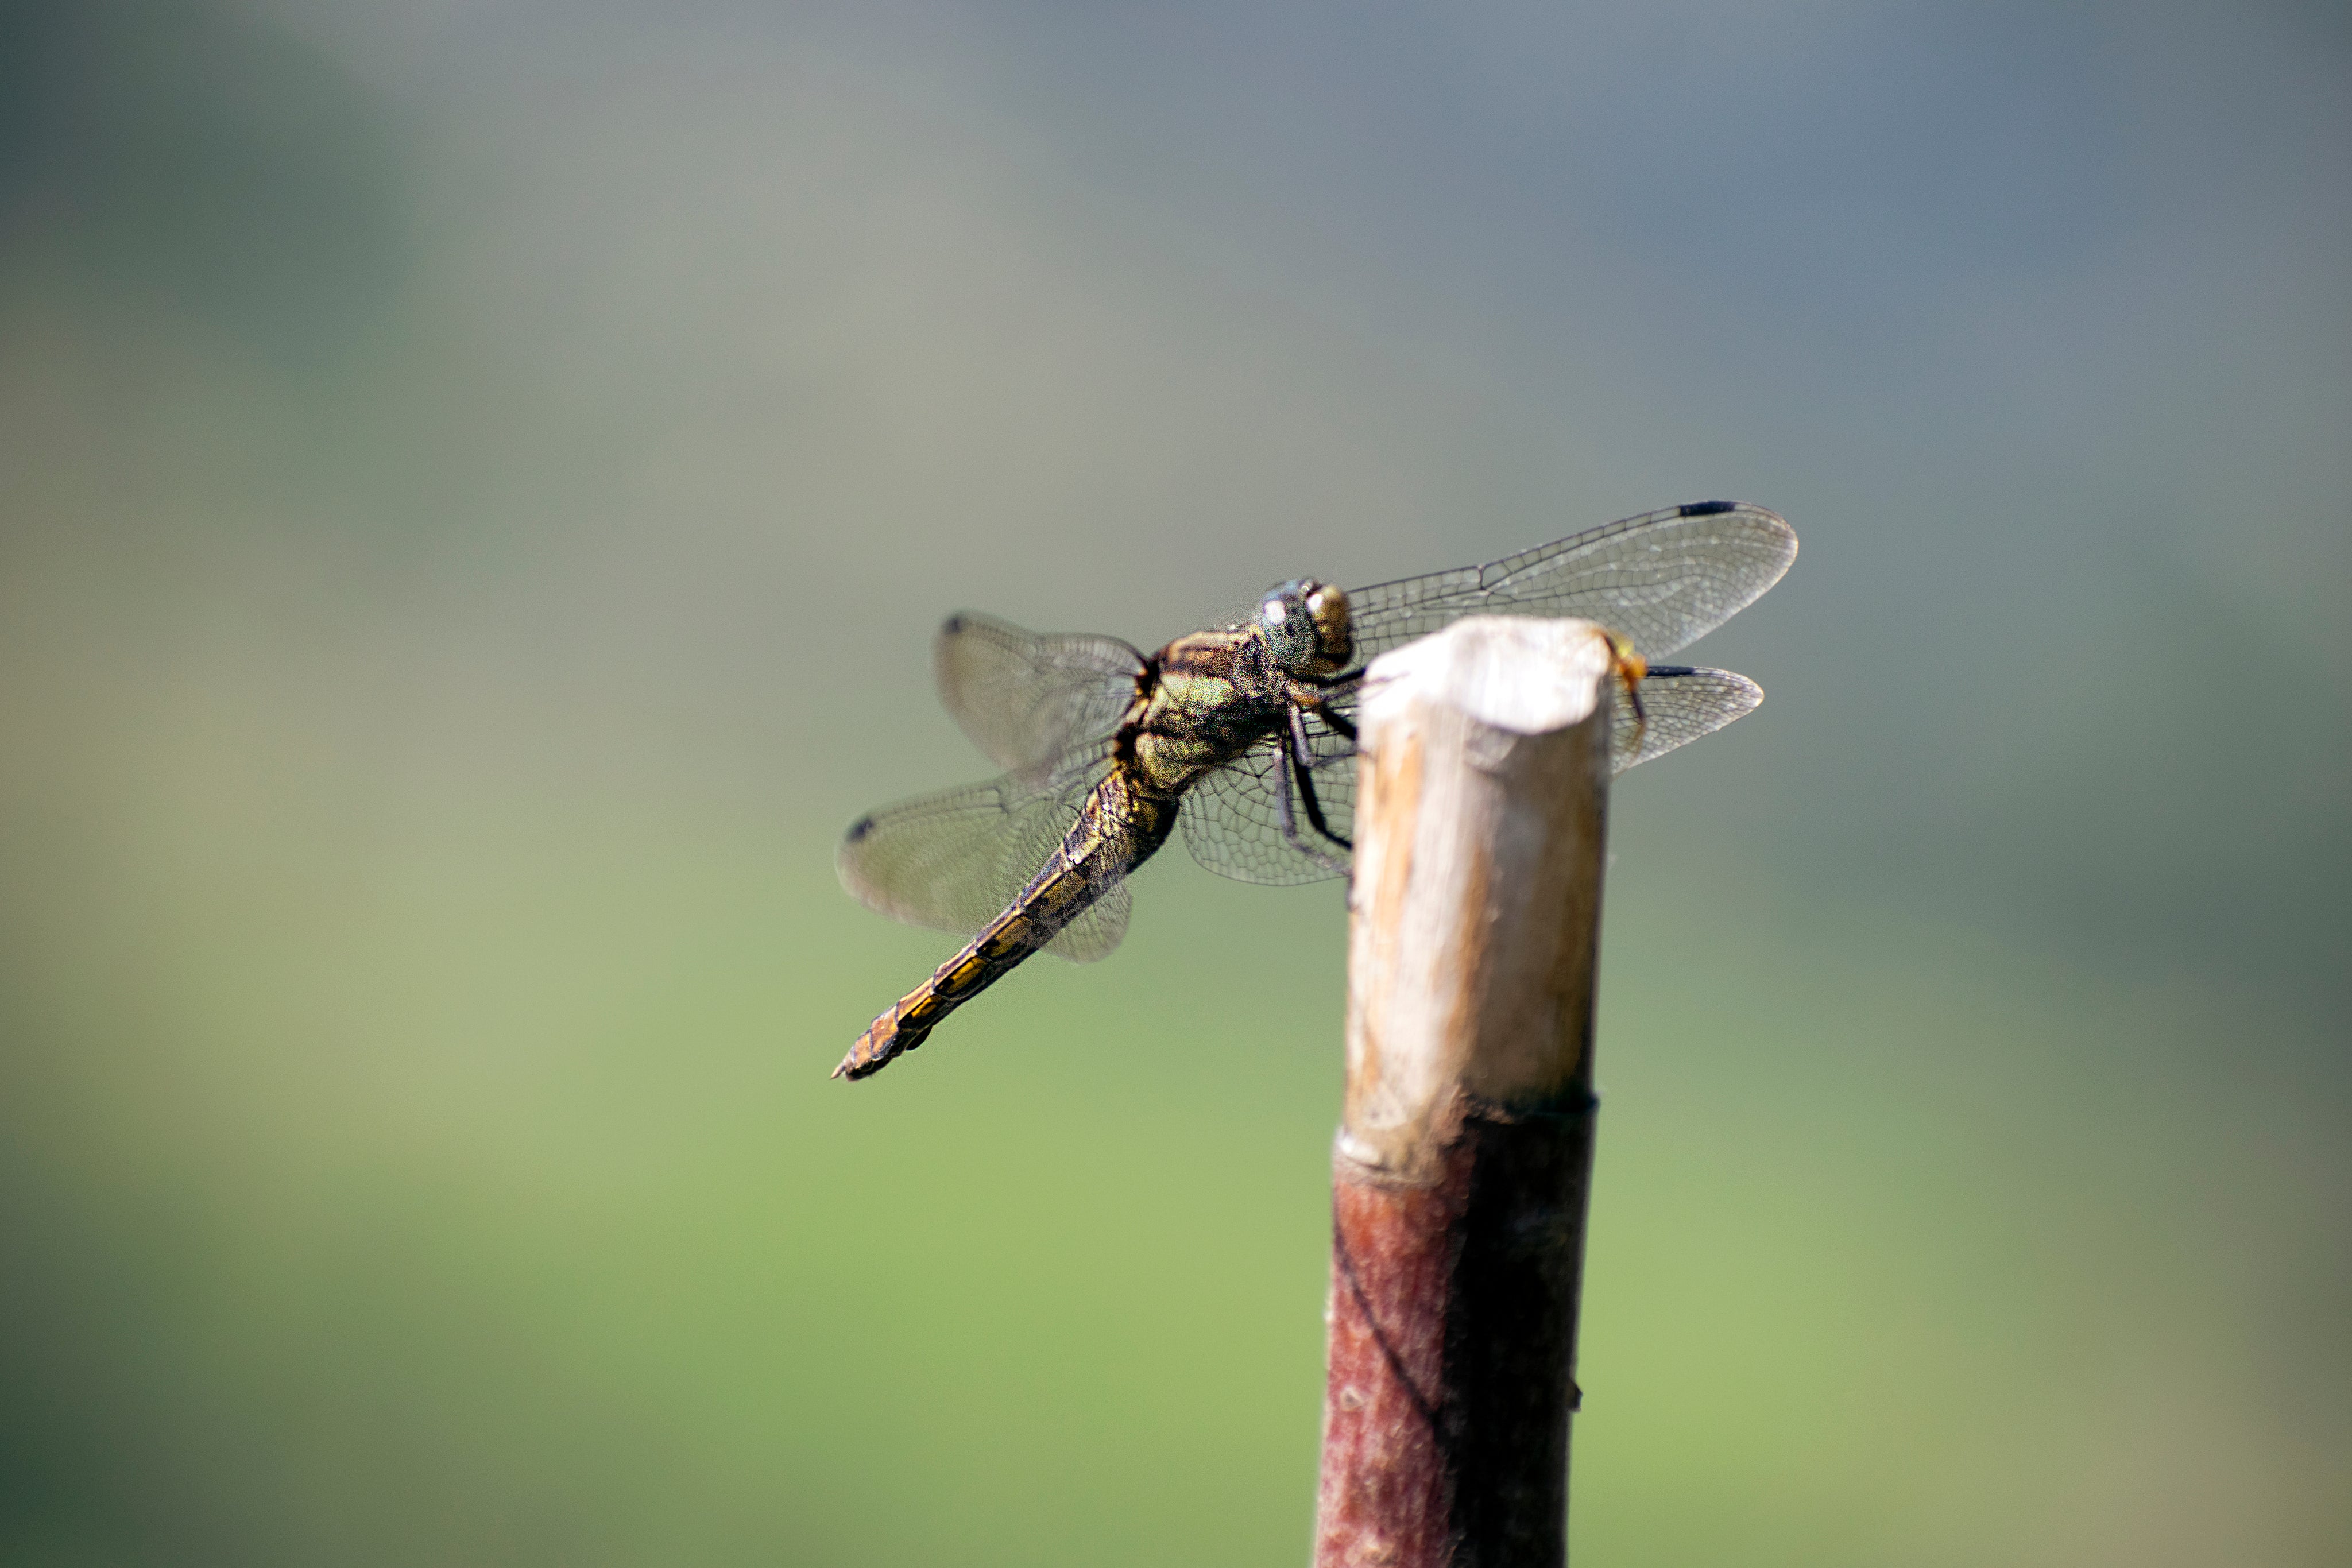 a-close-up-of-a-dragonfly-taking-a-rest.jpg